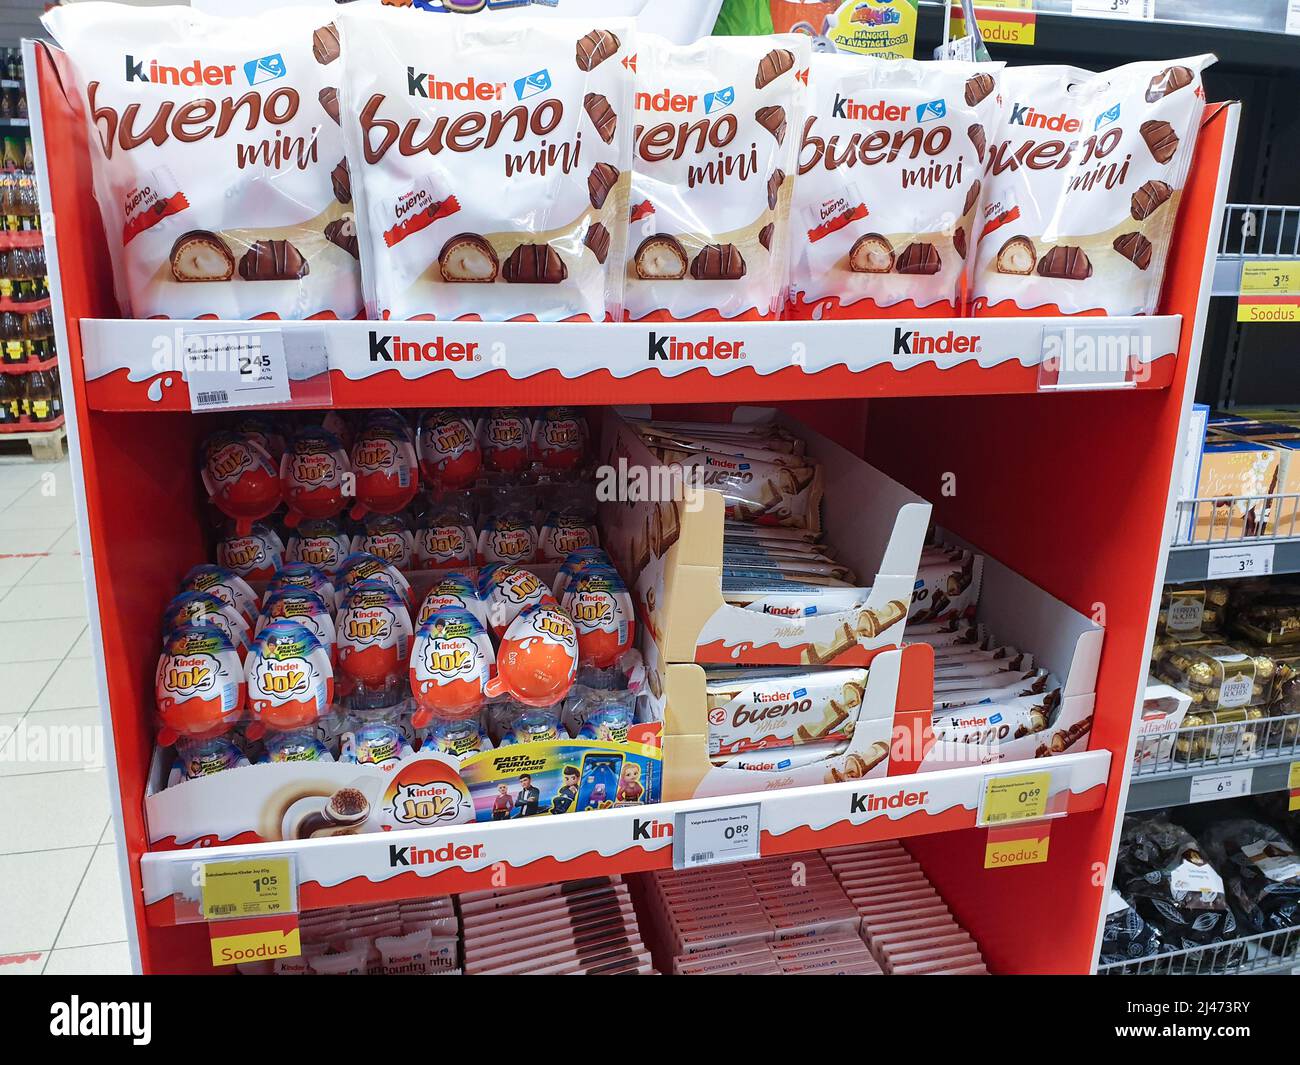 Recalled Kinder products still on store shelves